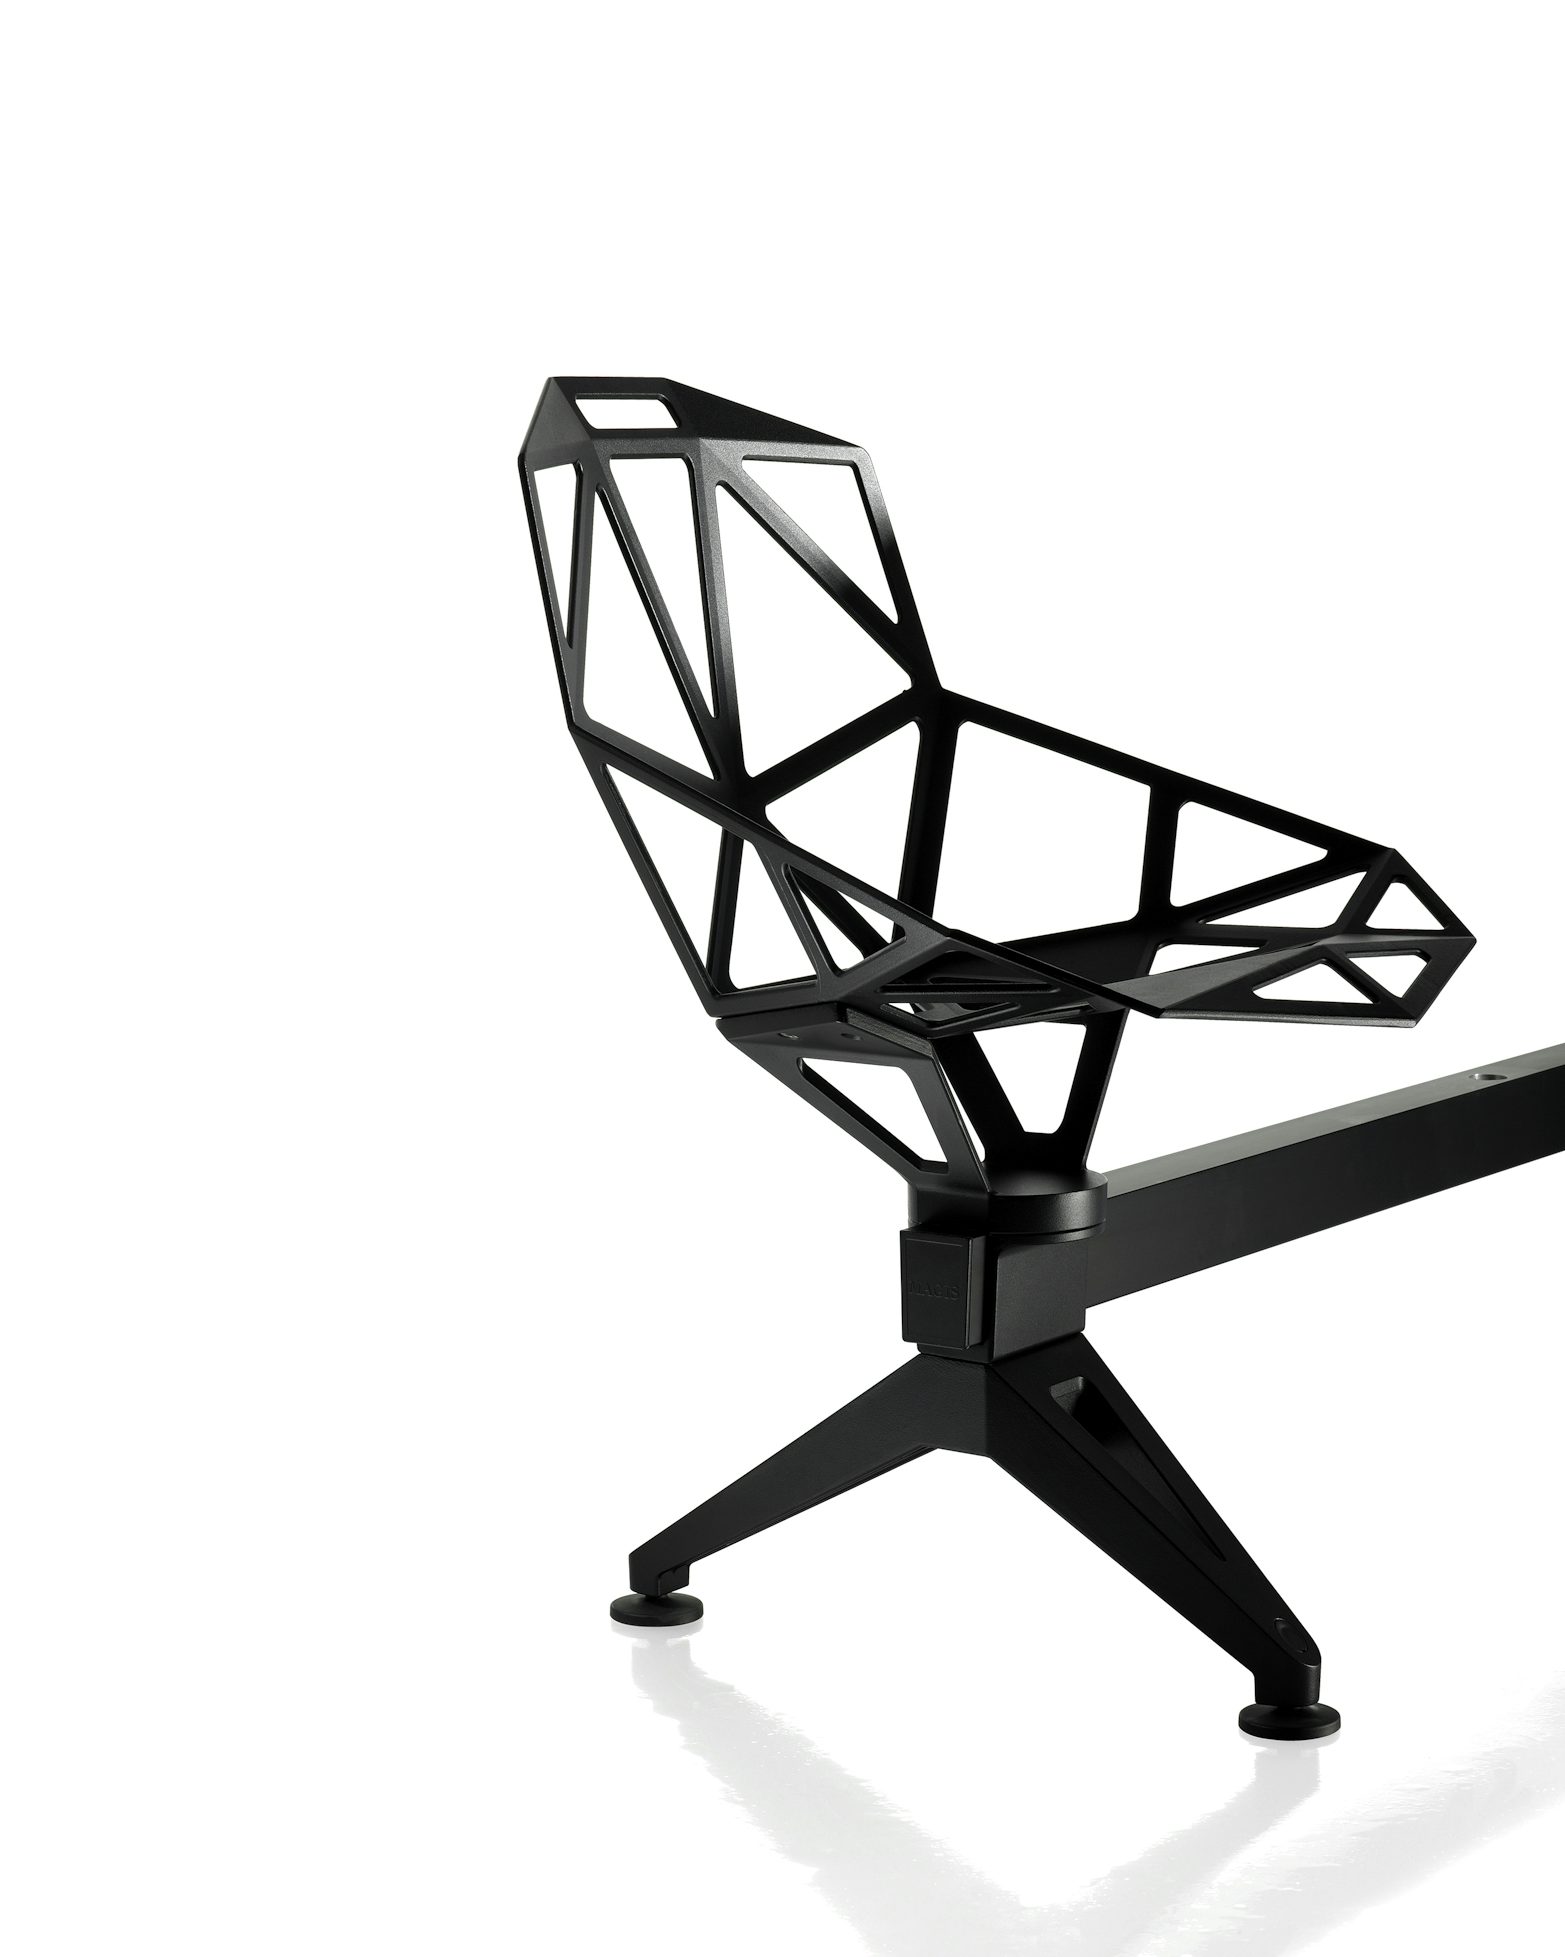 Chair One Public Seating System Konstantin Grcic Magis 4